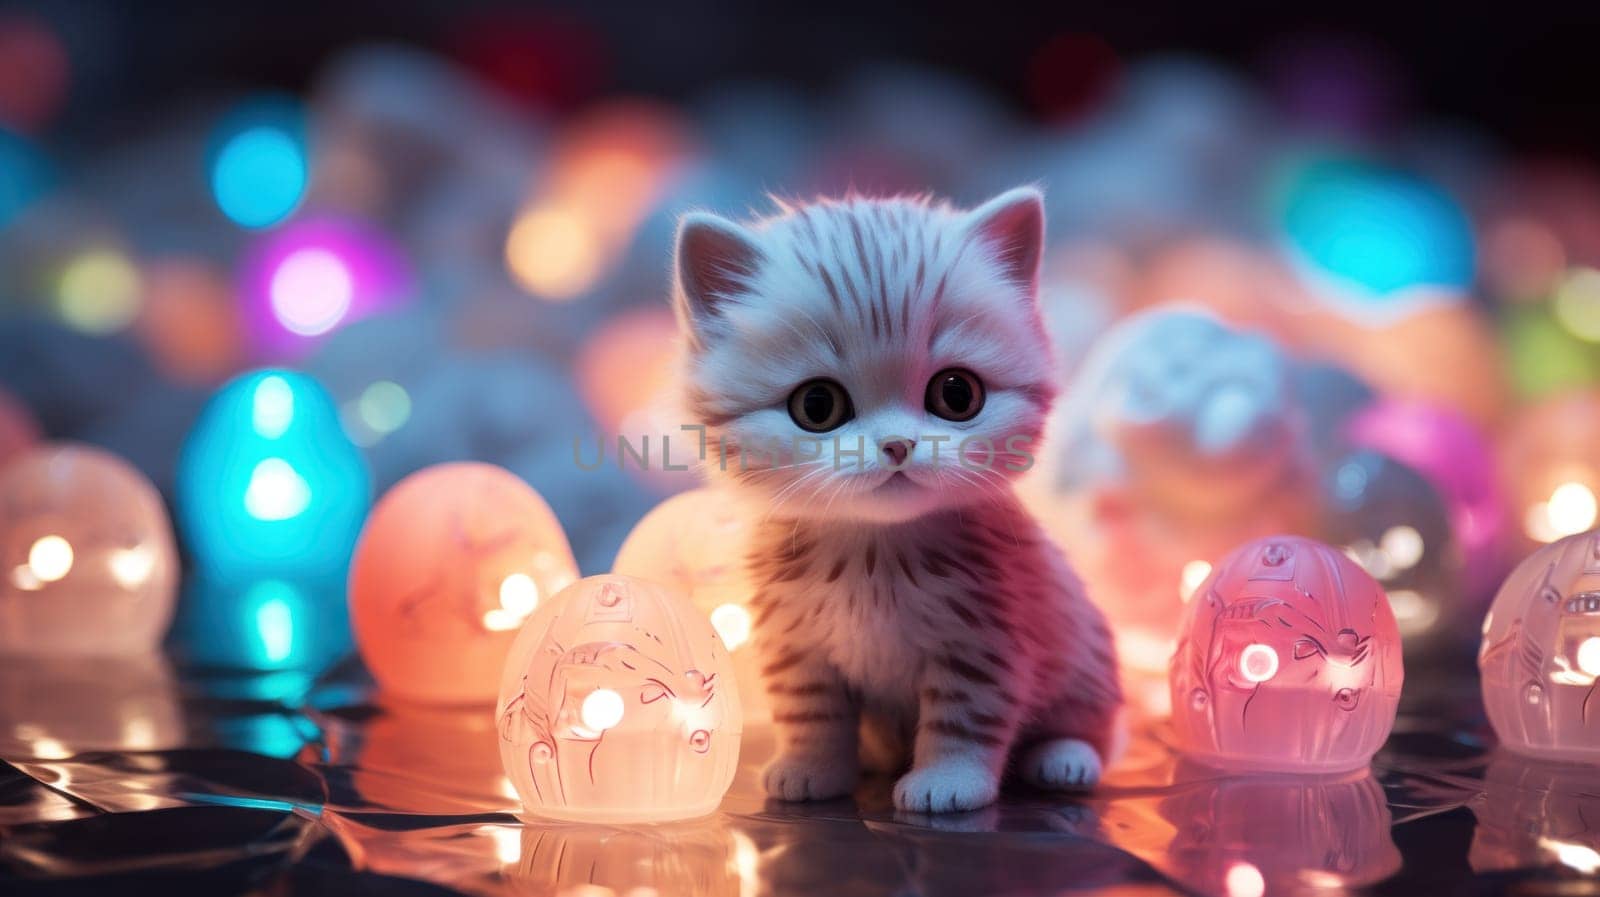 A small kitten sitting in front of a bunch of lit up eggs